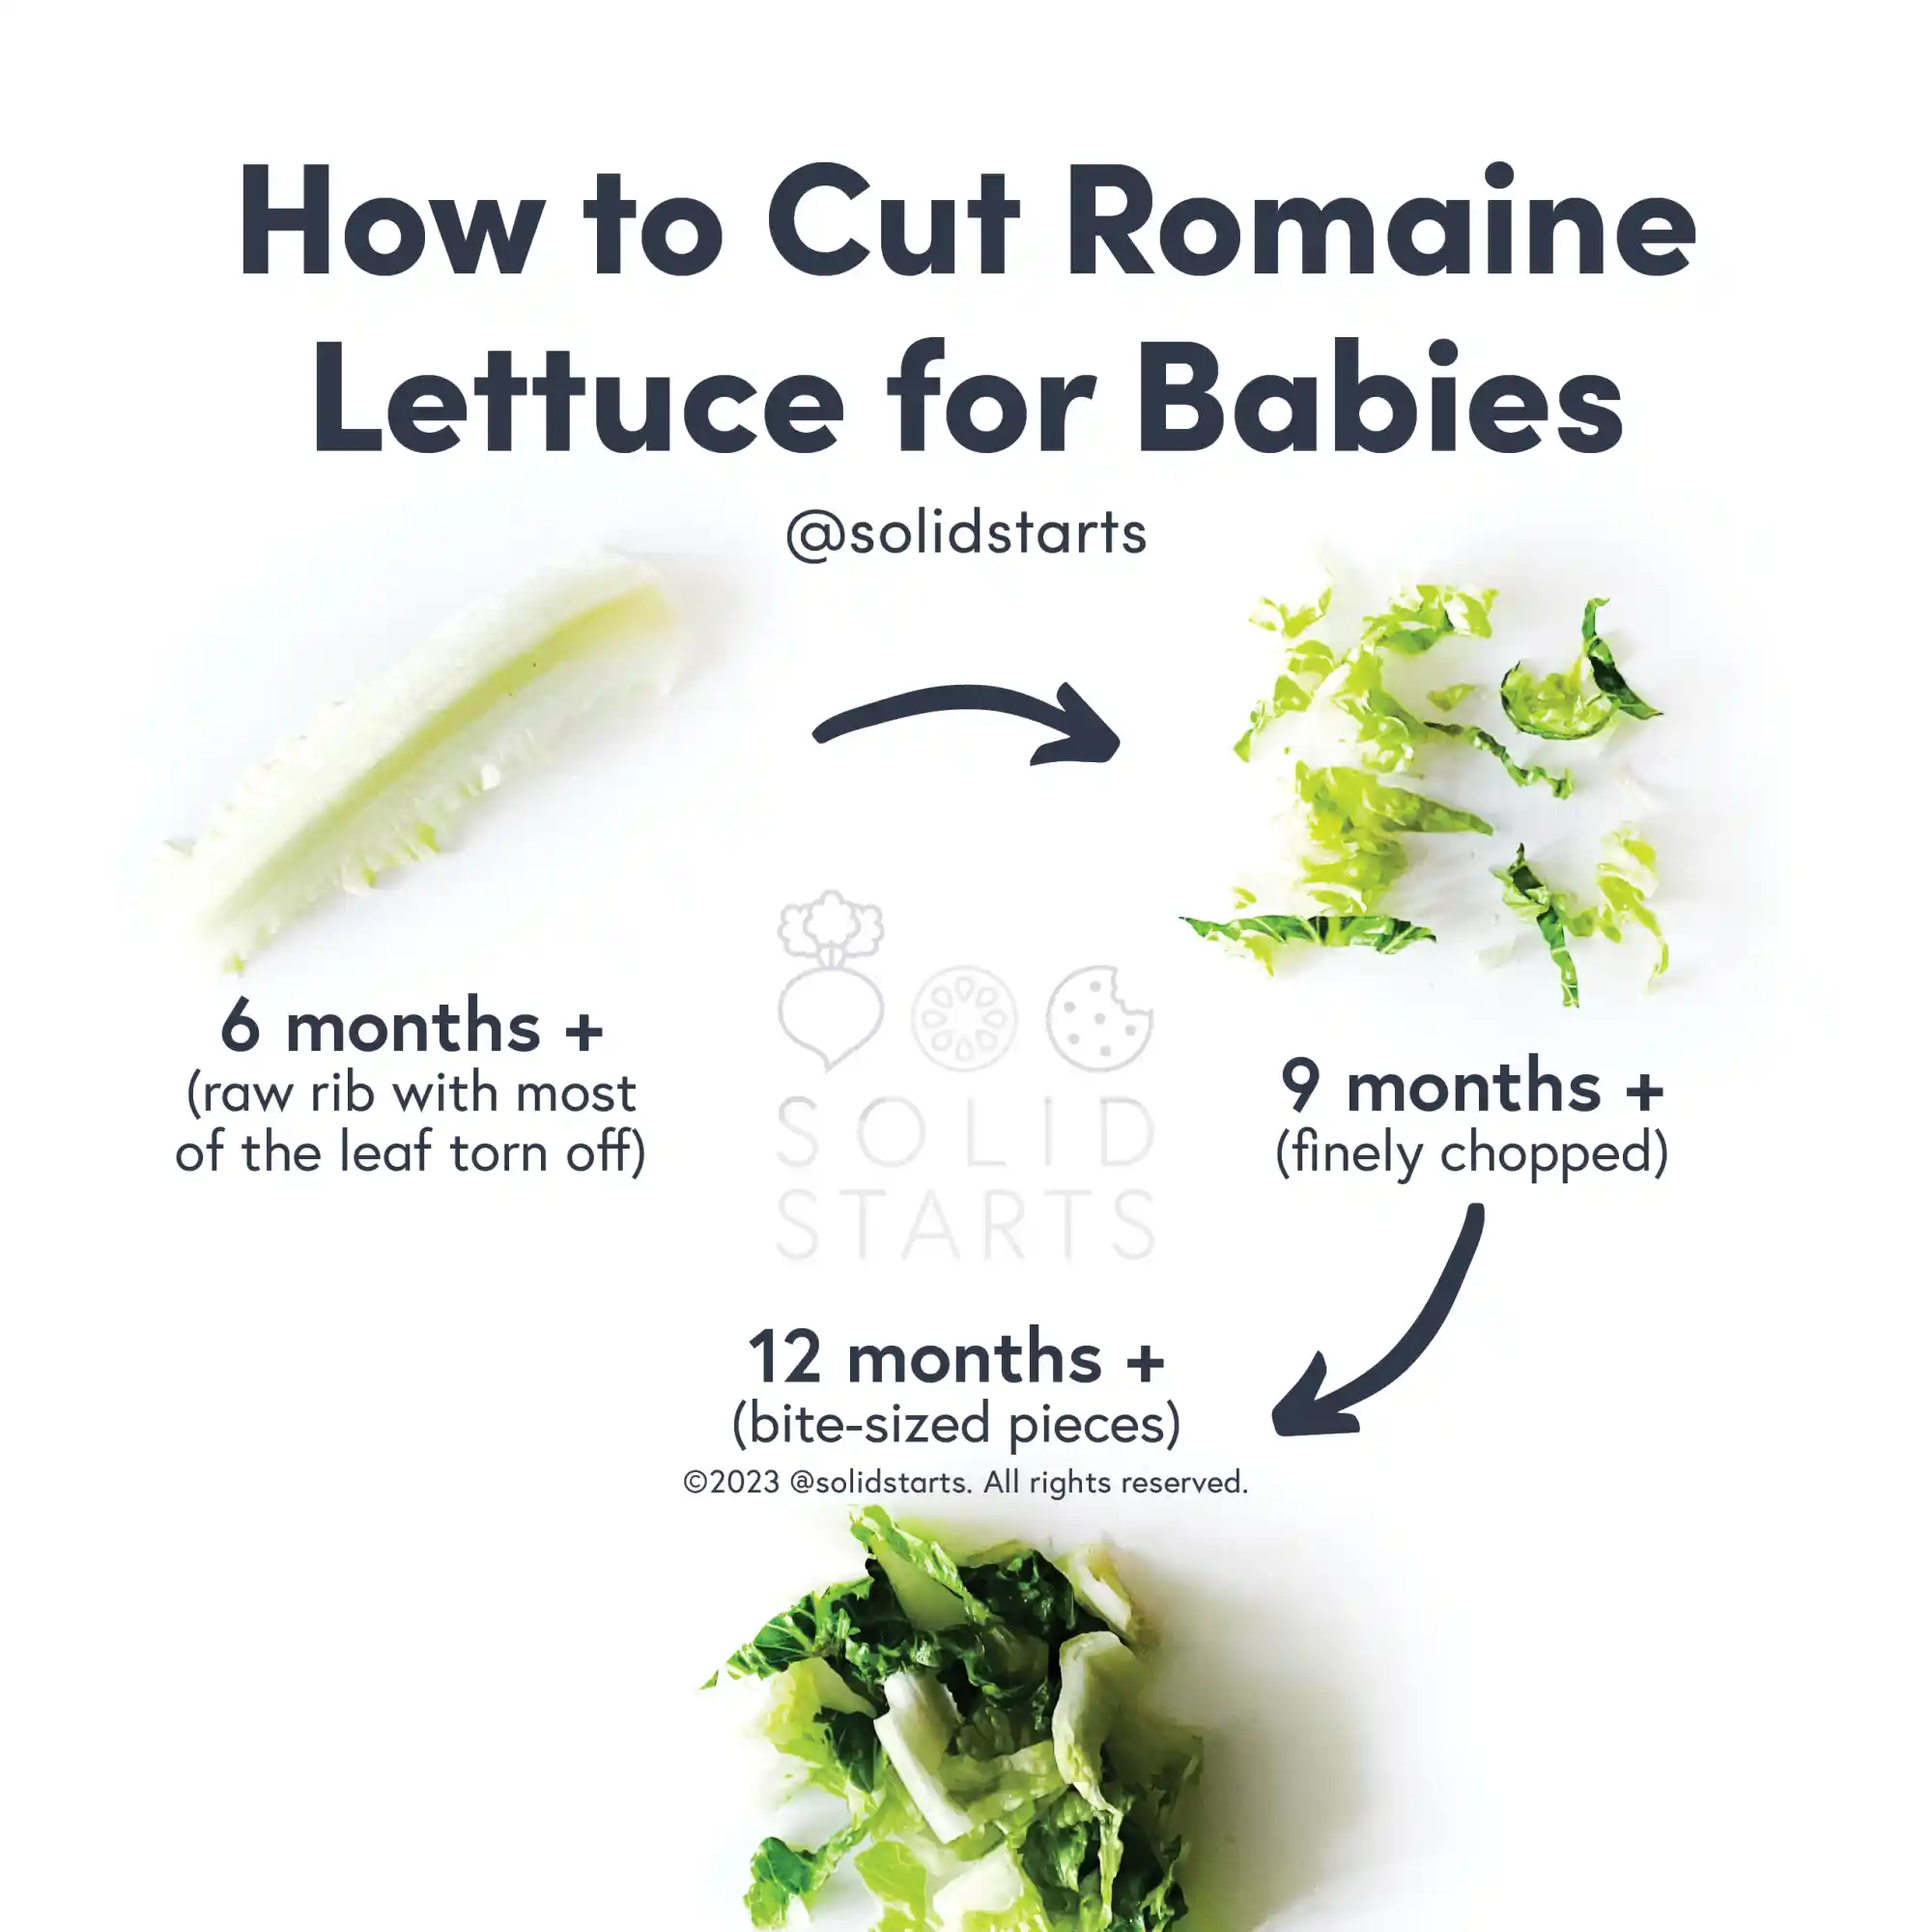 a Solid Starts infographic with the header How to Cut Romaine Lettuce for Babies: a rib with most of the leaf torn off for babies 6 months+, finely chopped for 9 months+, bite-sized pieces for 12 months+